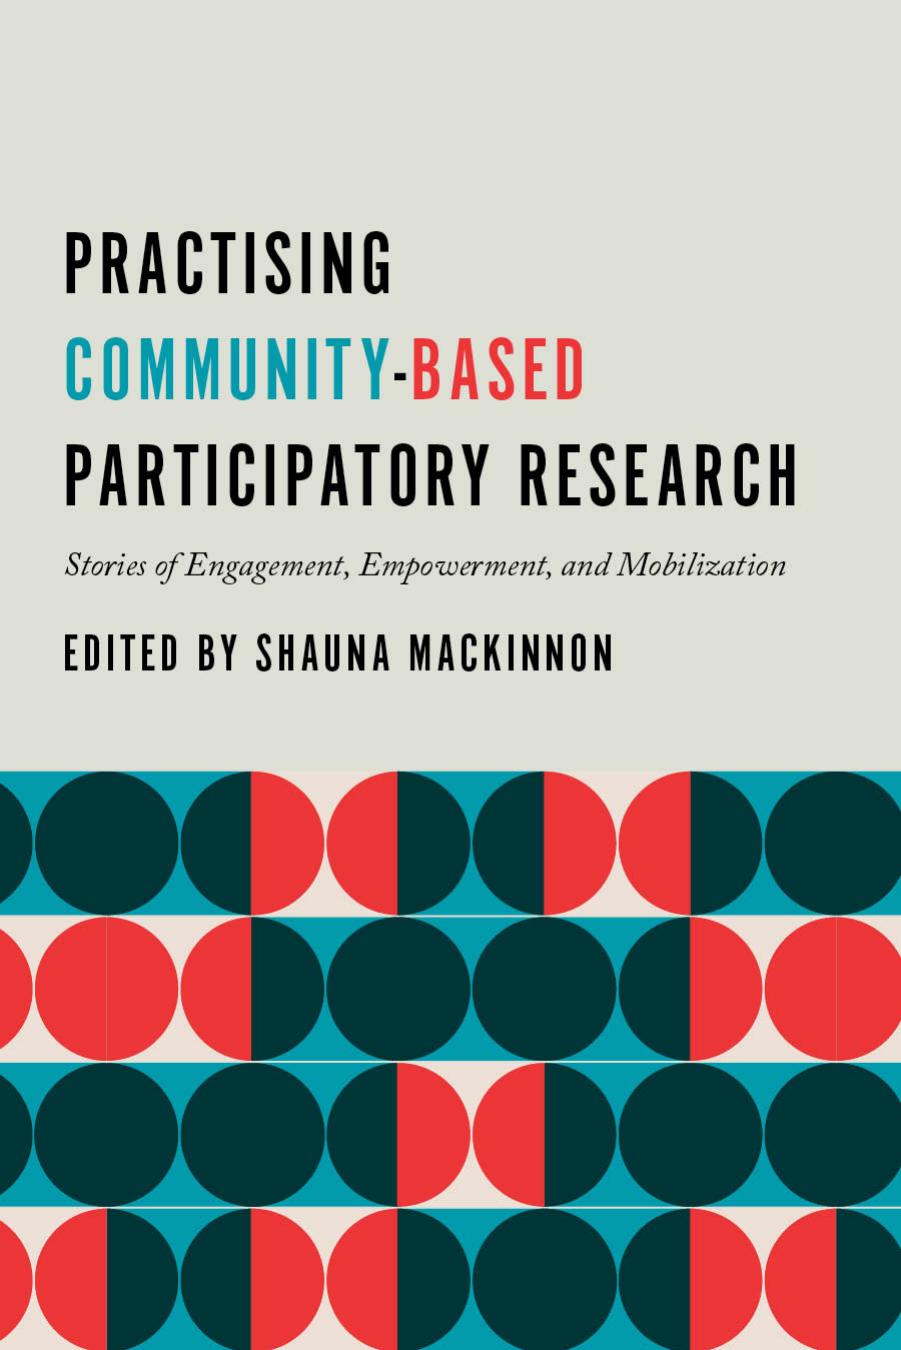 Practising Community-Based Participatory Research : Stories of Engagement, Empowerment, and Mobilization by Shauna MacKinnon